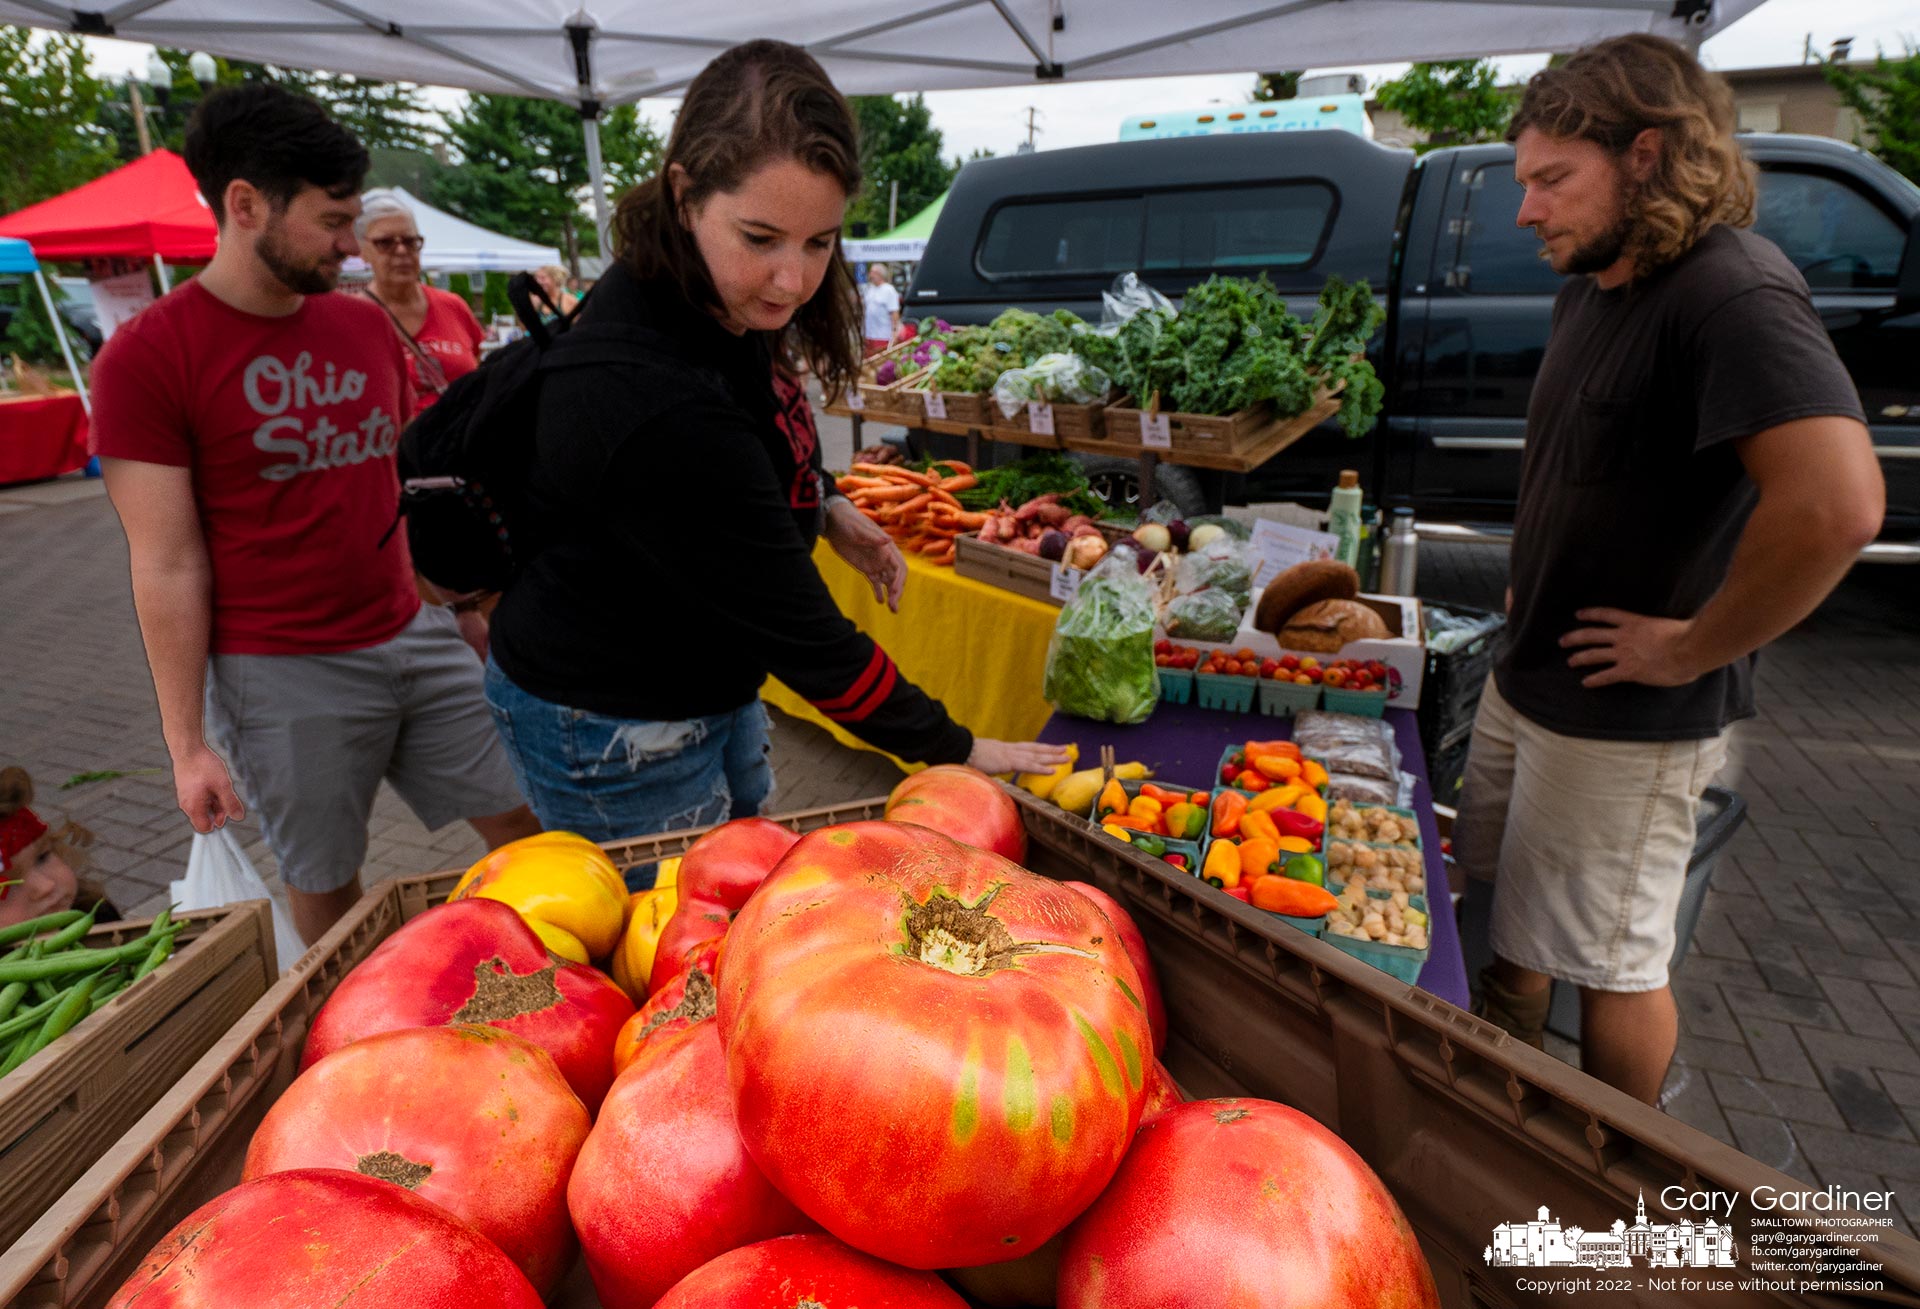 Shoppers at the Saturday Farmers Market in Uptown Westerville had their choice of fresh Ohio-grown fruits and vegetables including these large heirlooms from Drift Hills Farms. My Final Photo for Sept. 3, 2022.